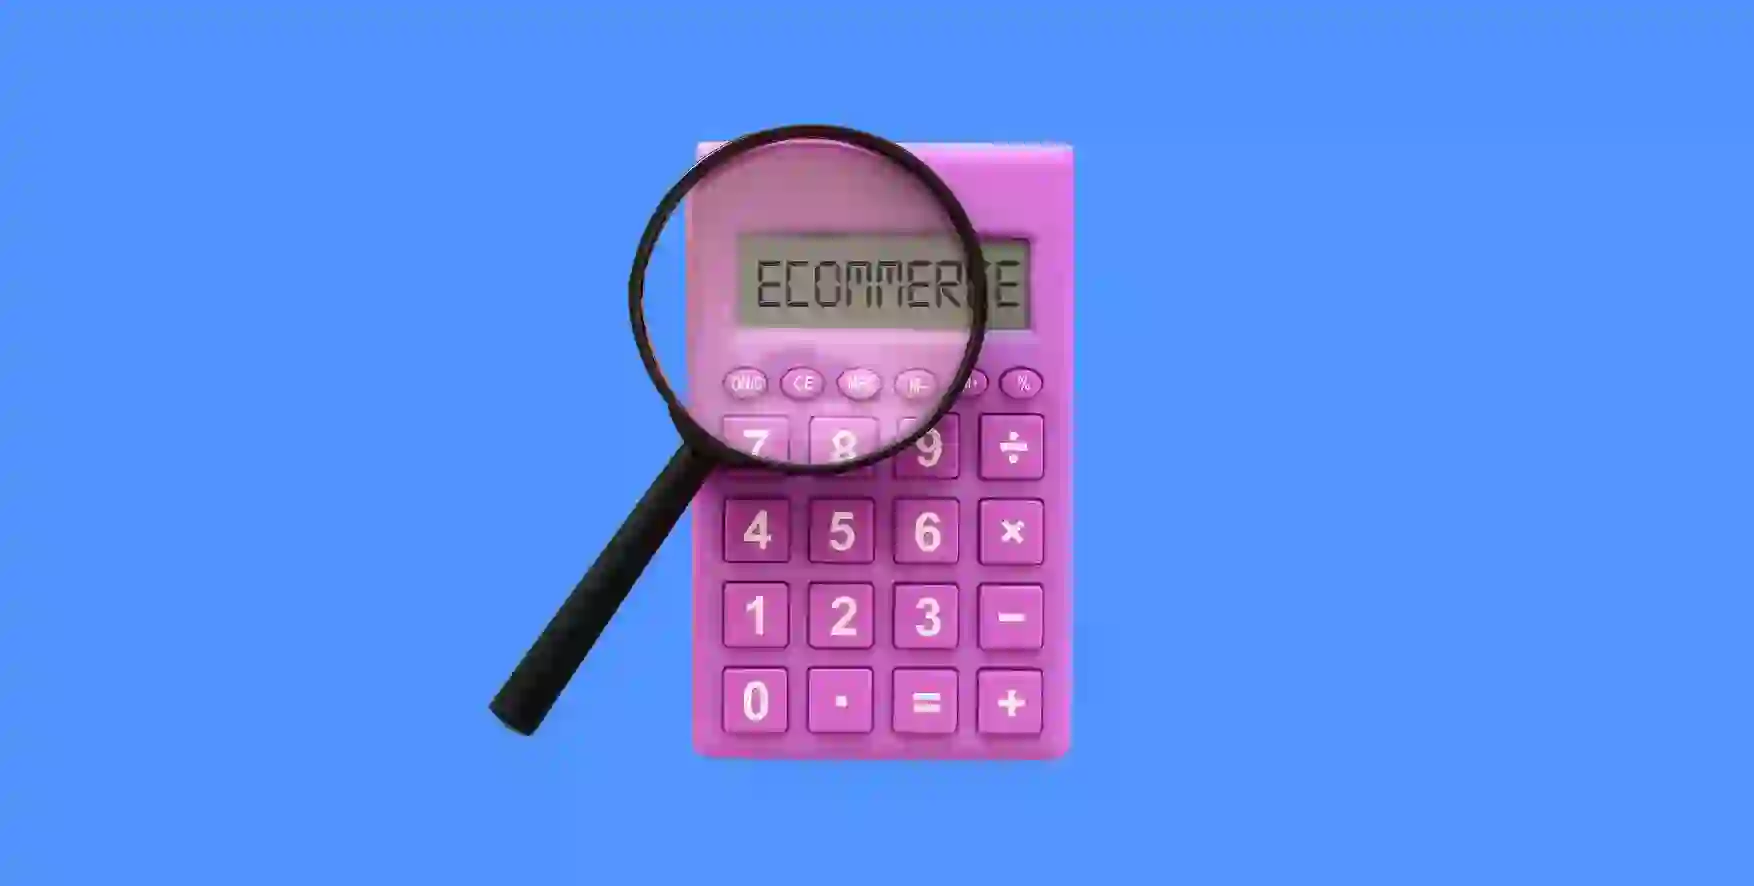 the word ecommerce is written on the calculator screen